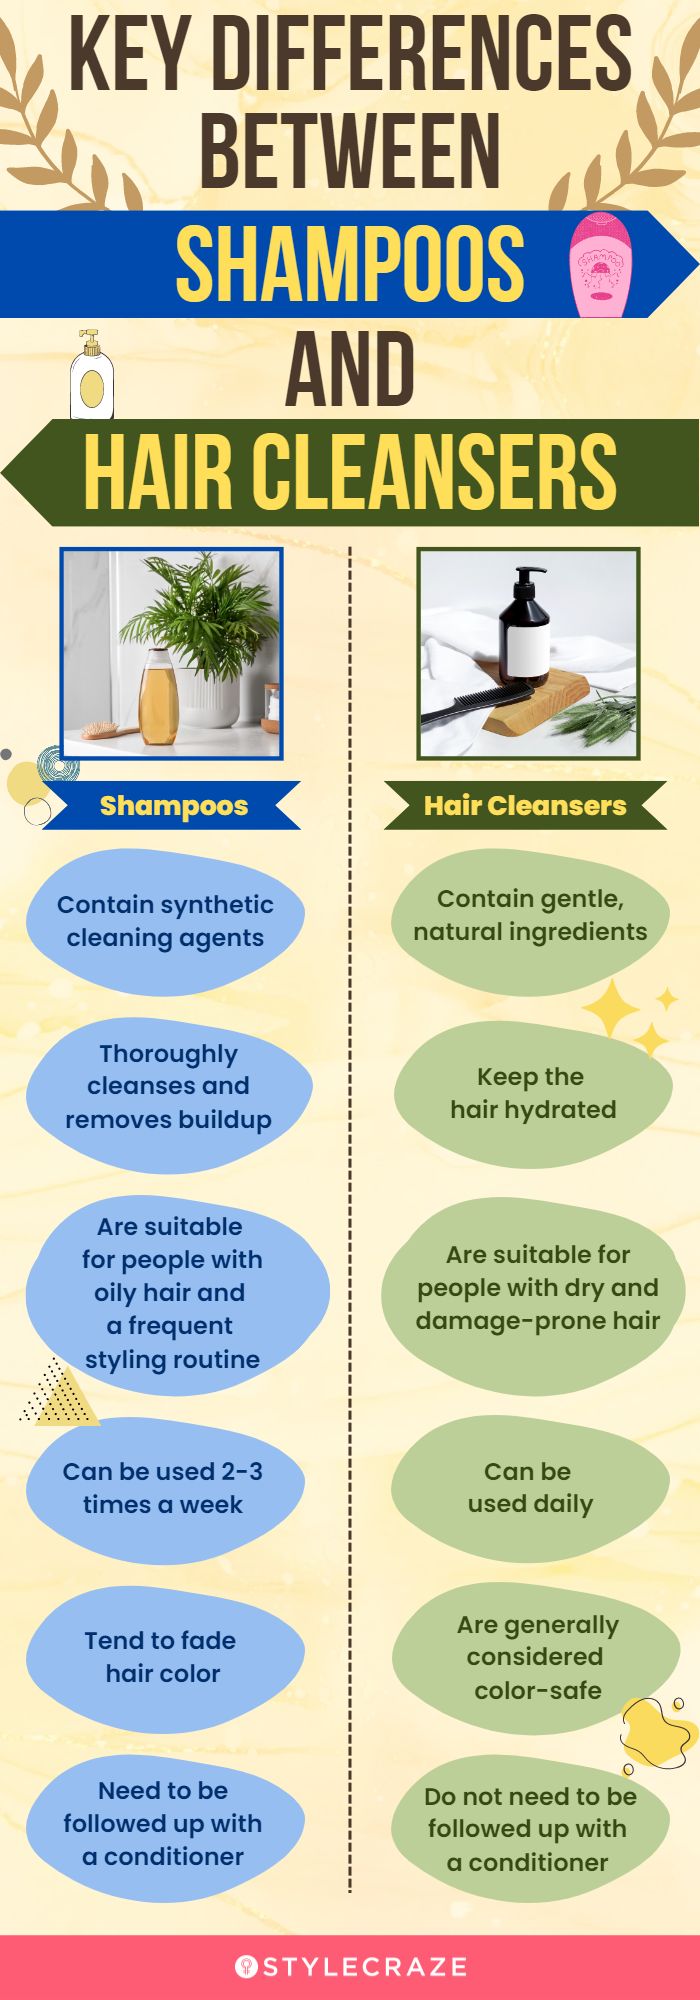 key differences between shampoos and hair cleansers(infographic)